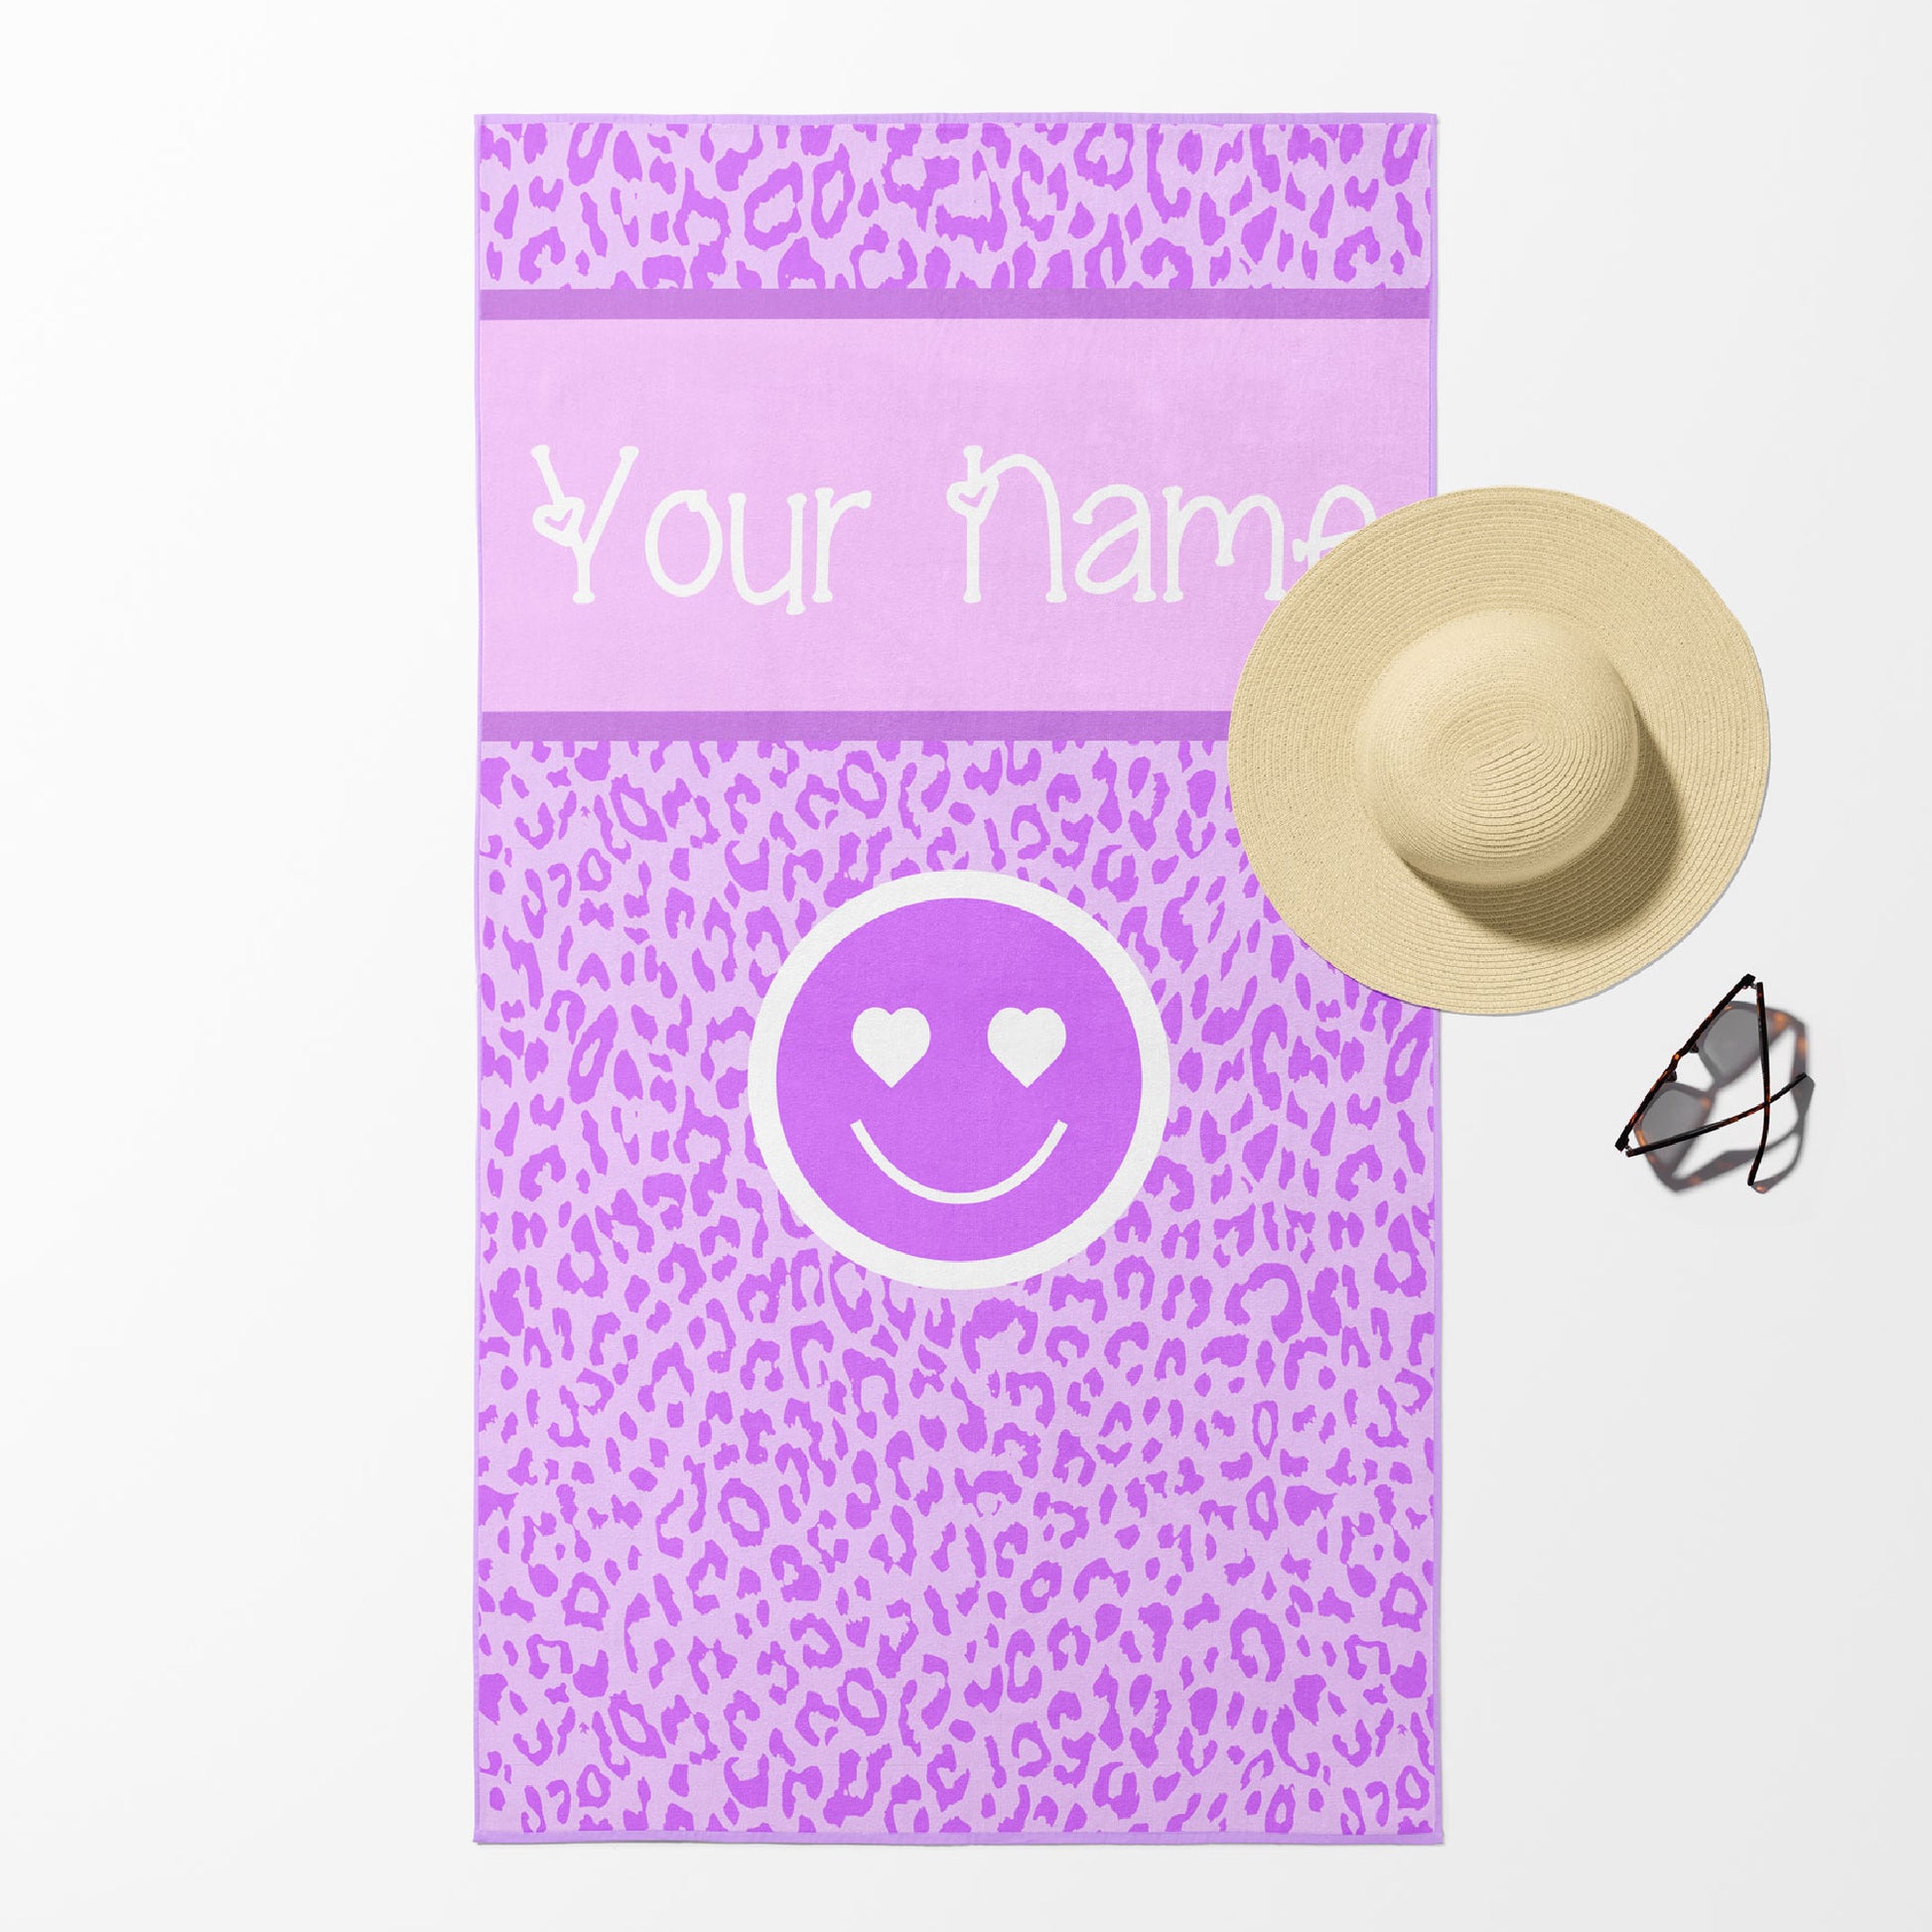 Beach towel in purple and lavender leopard print with smiley face and customizable text.